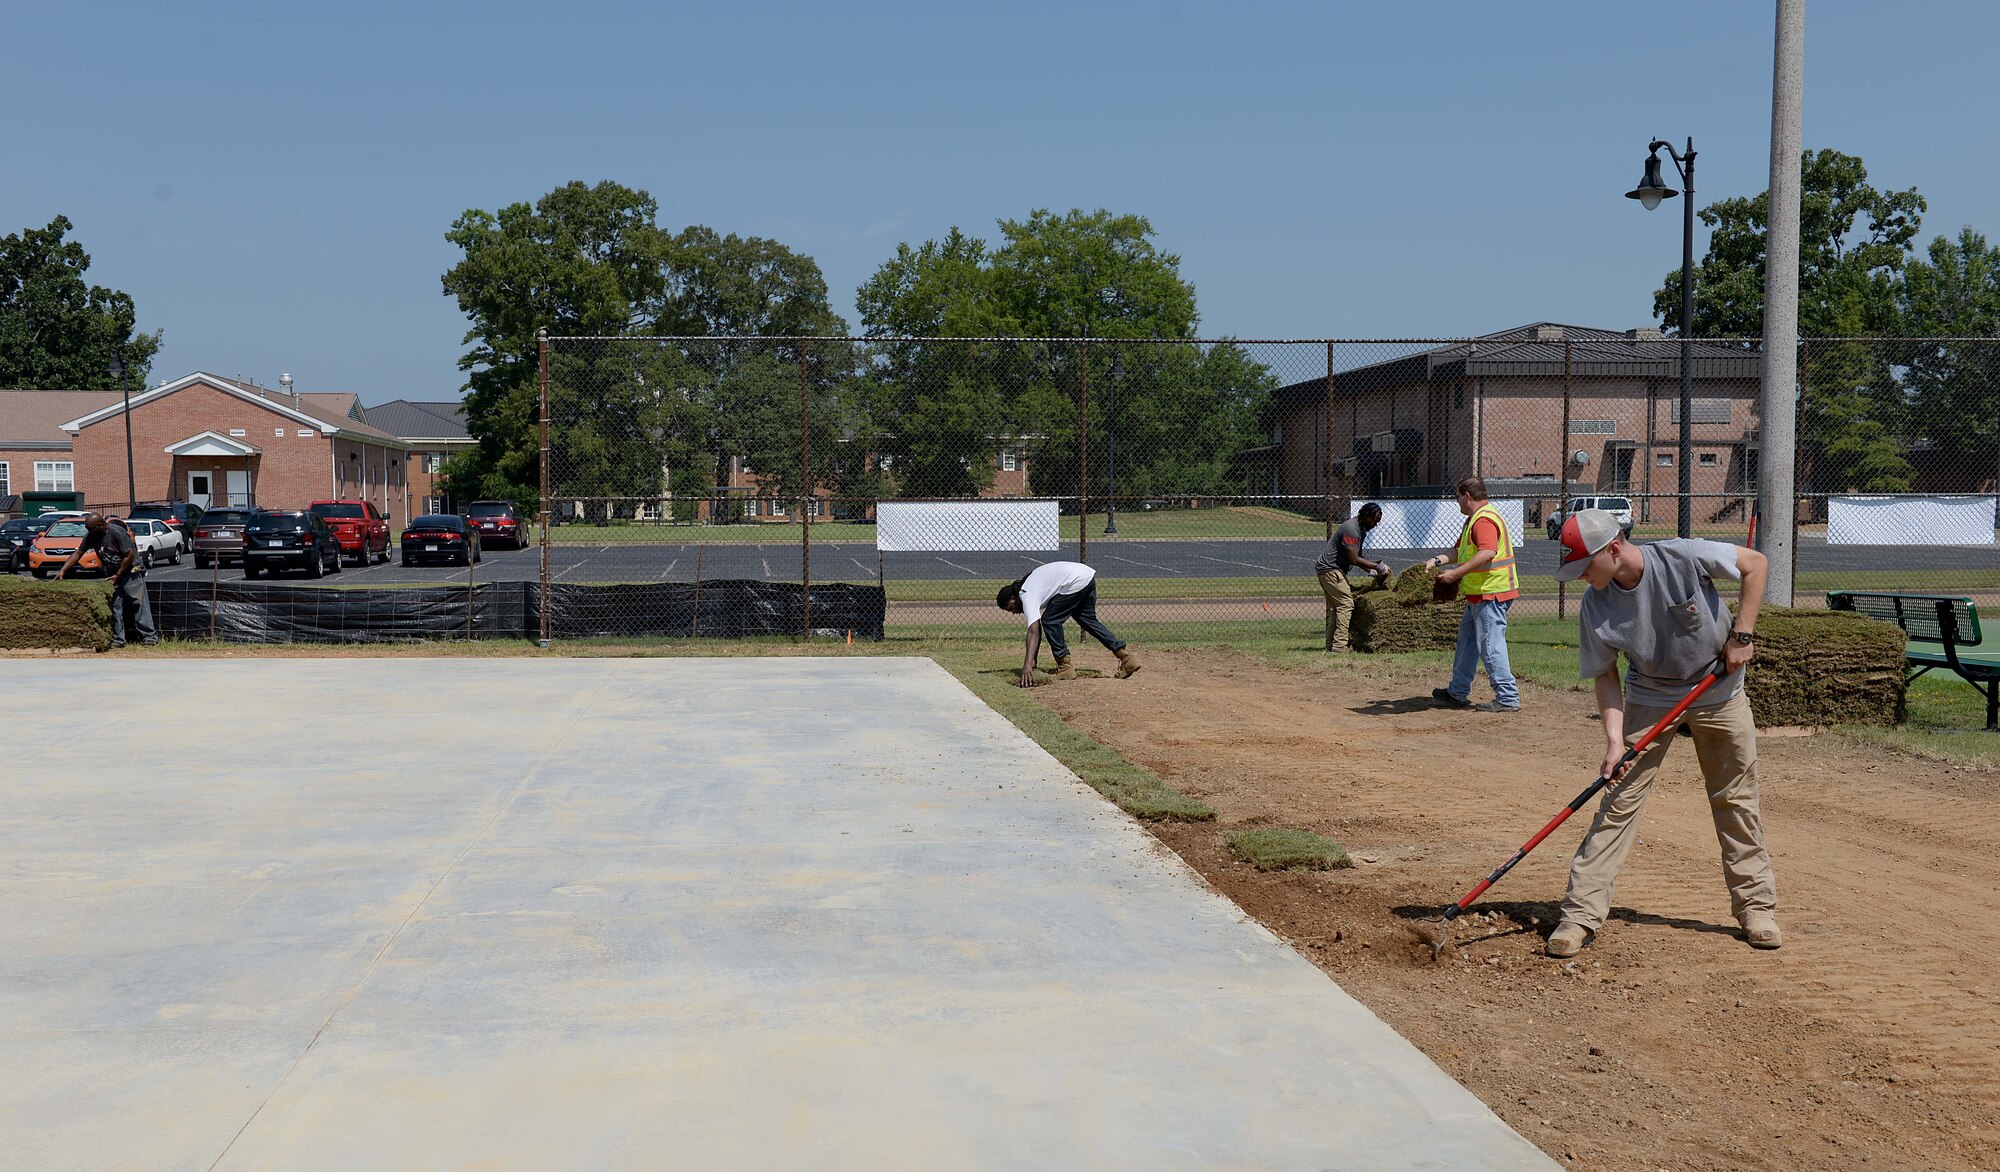 Contracted construction workers place turf around the Alpha Warrior concrete pad Aug. 13, 2018, on Columbus Air Force Base, Mississippi. Alpha Warrior designs state-of-the-art workout stations called battle rigs or battle stations, similar to the well-known “American Ninja Warrior” obstacle courses. (U.S. Air Force photo by Airman Hannah Bean)